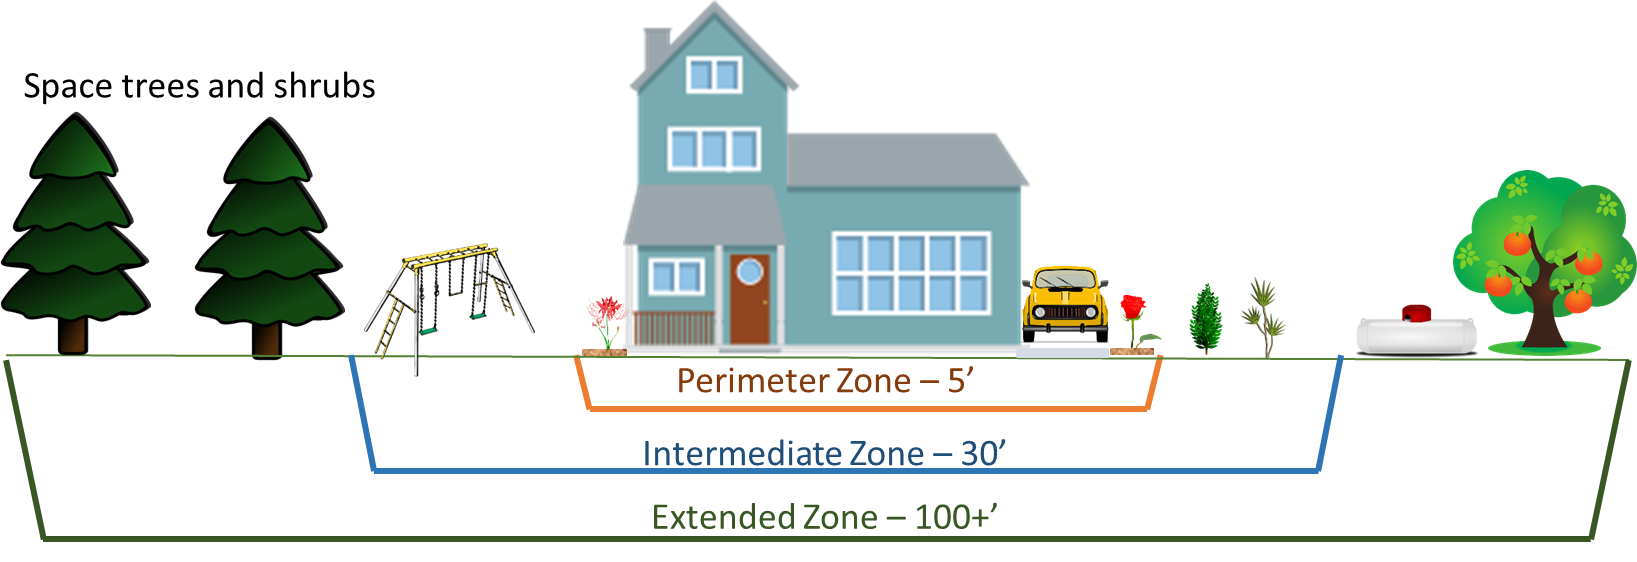 Fire - Protection zones around home